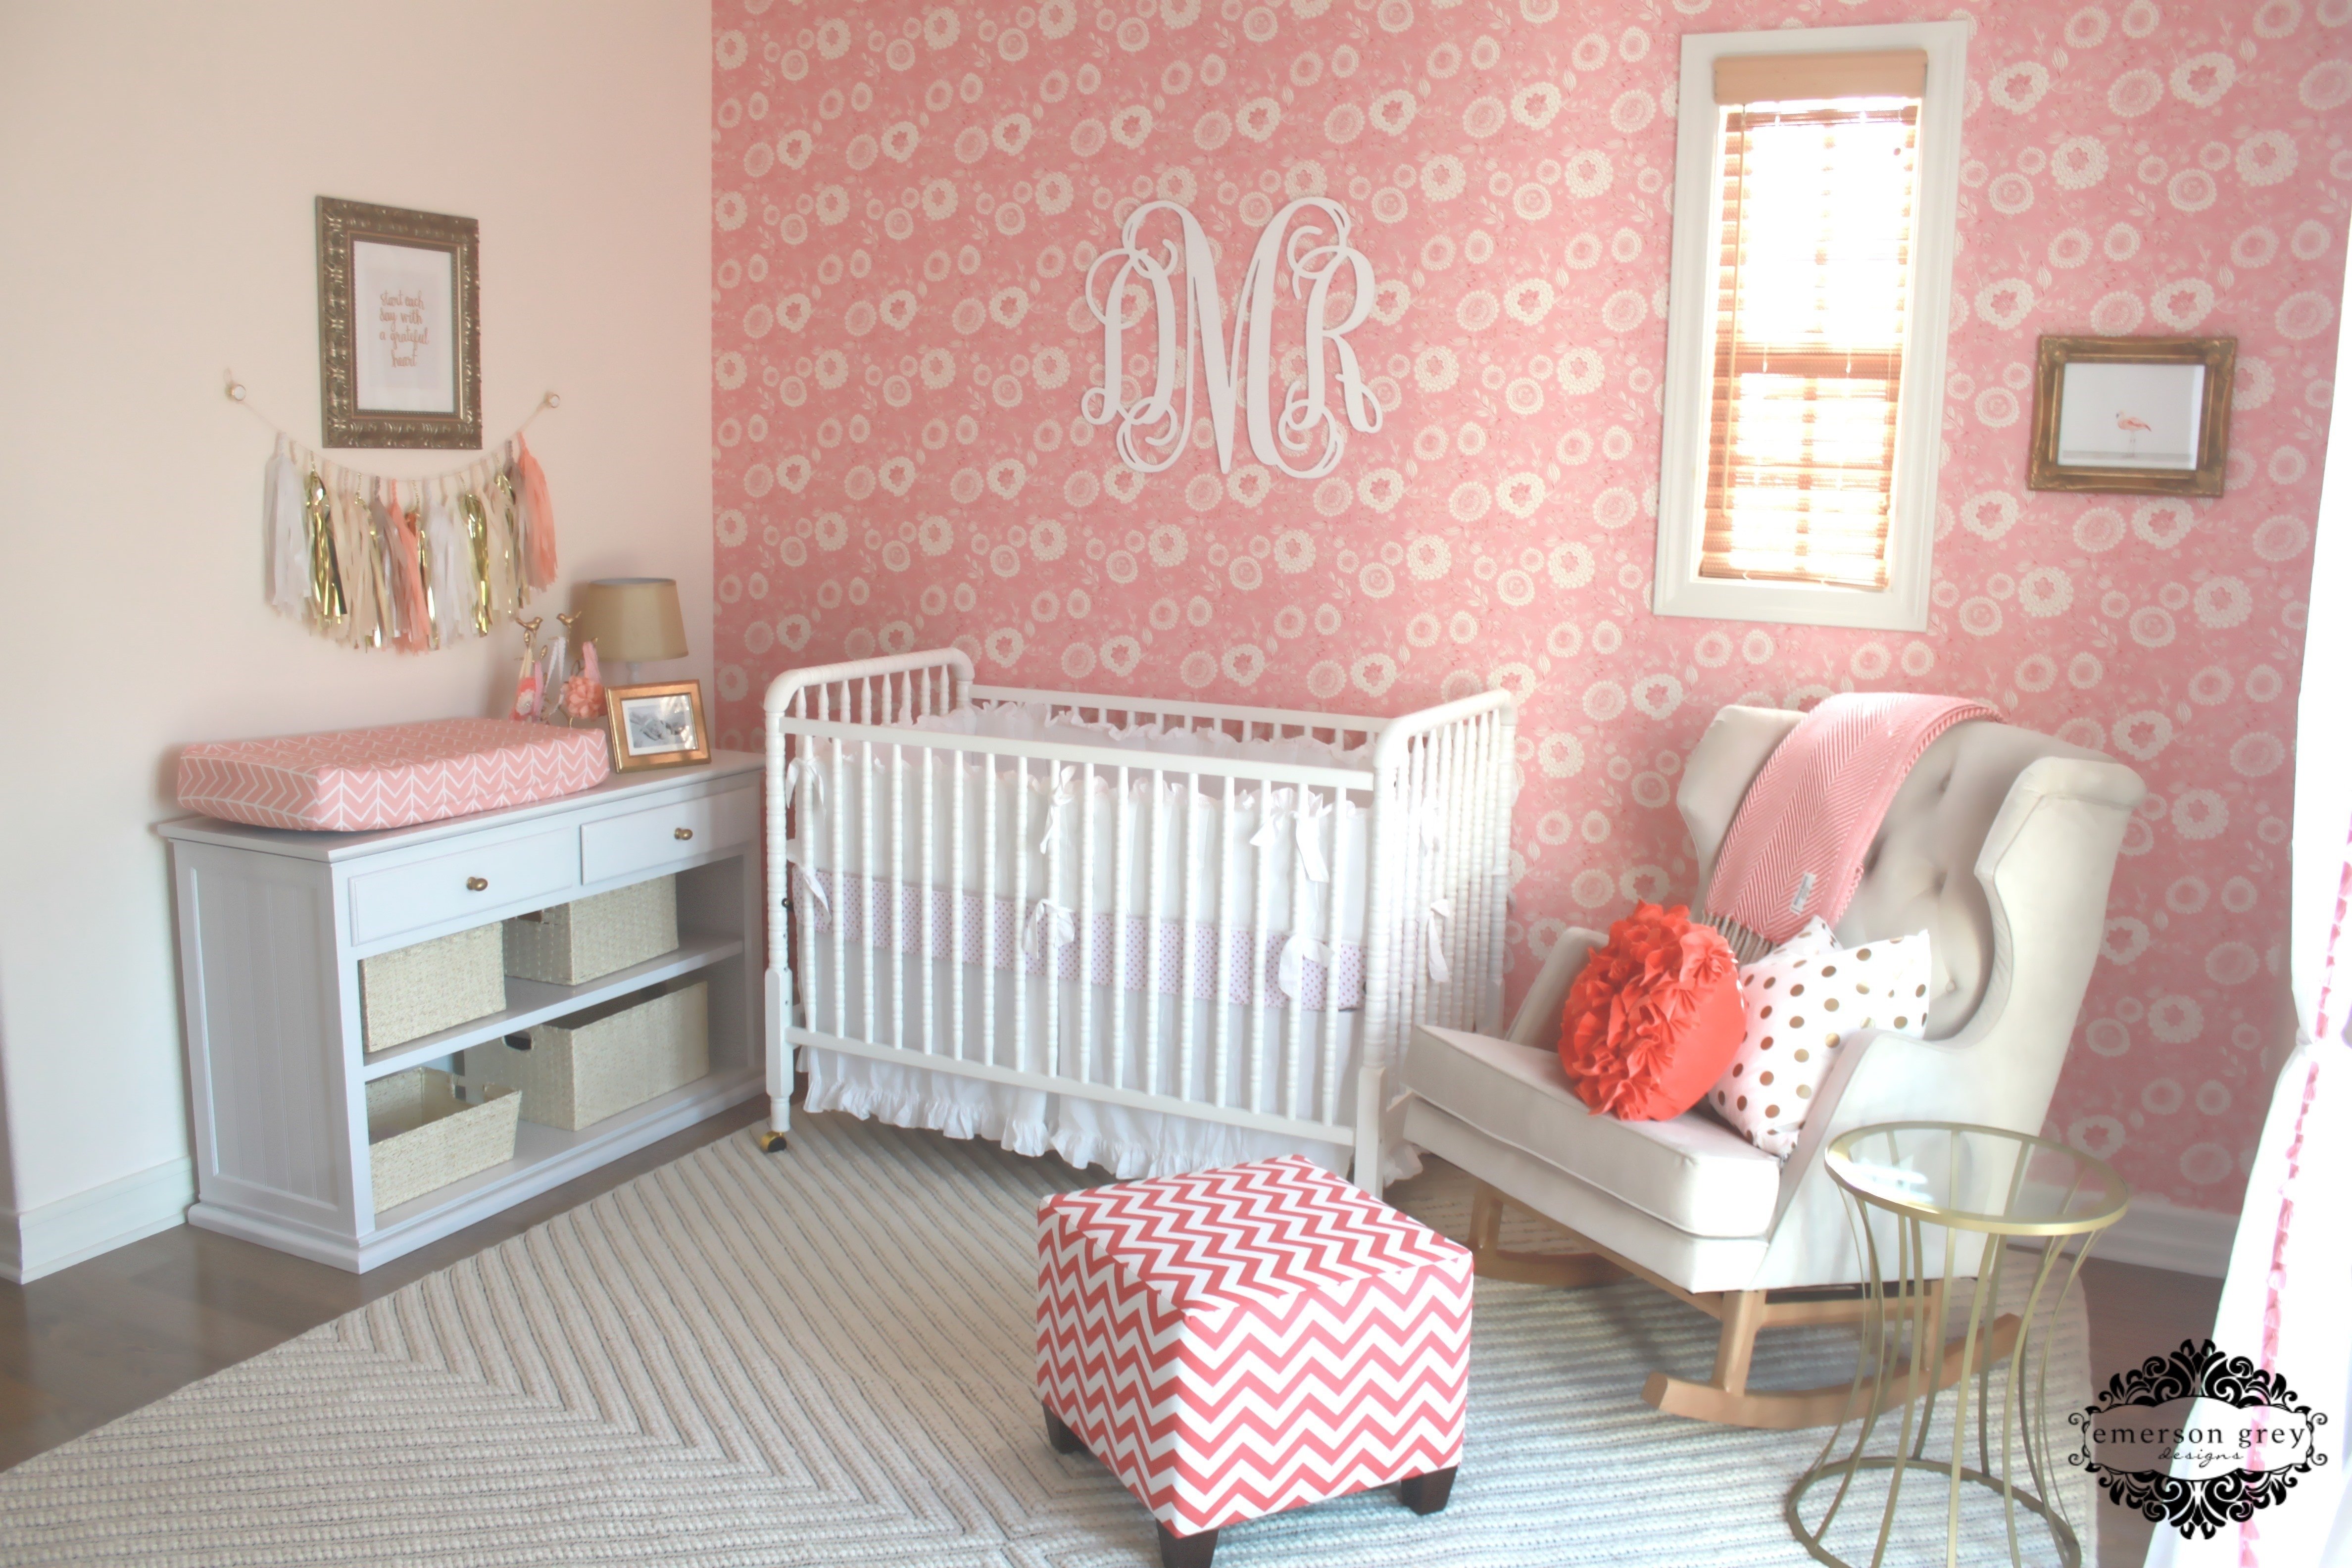 10 Wonderful Little Girl Room Decorating Ideas beautiful design decorating ideas for little girls room awesome kids 2022